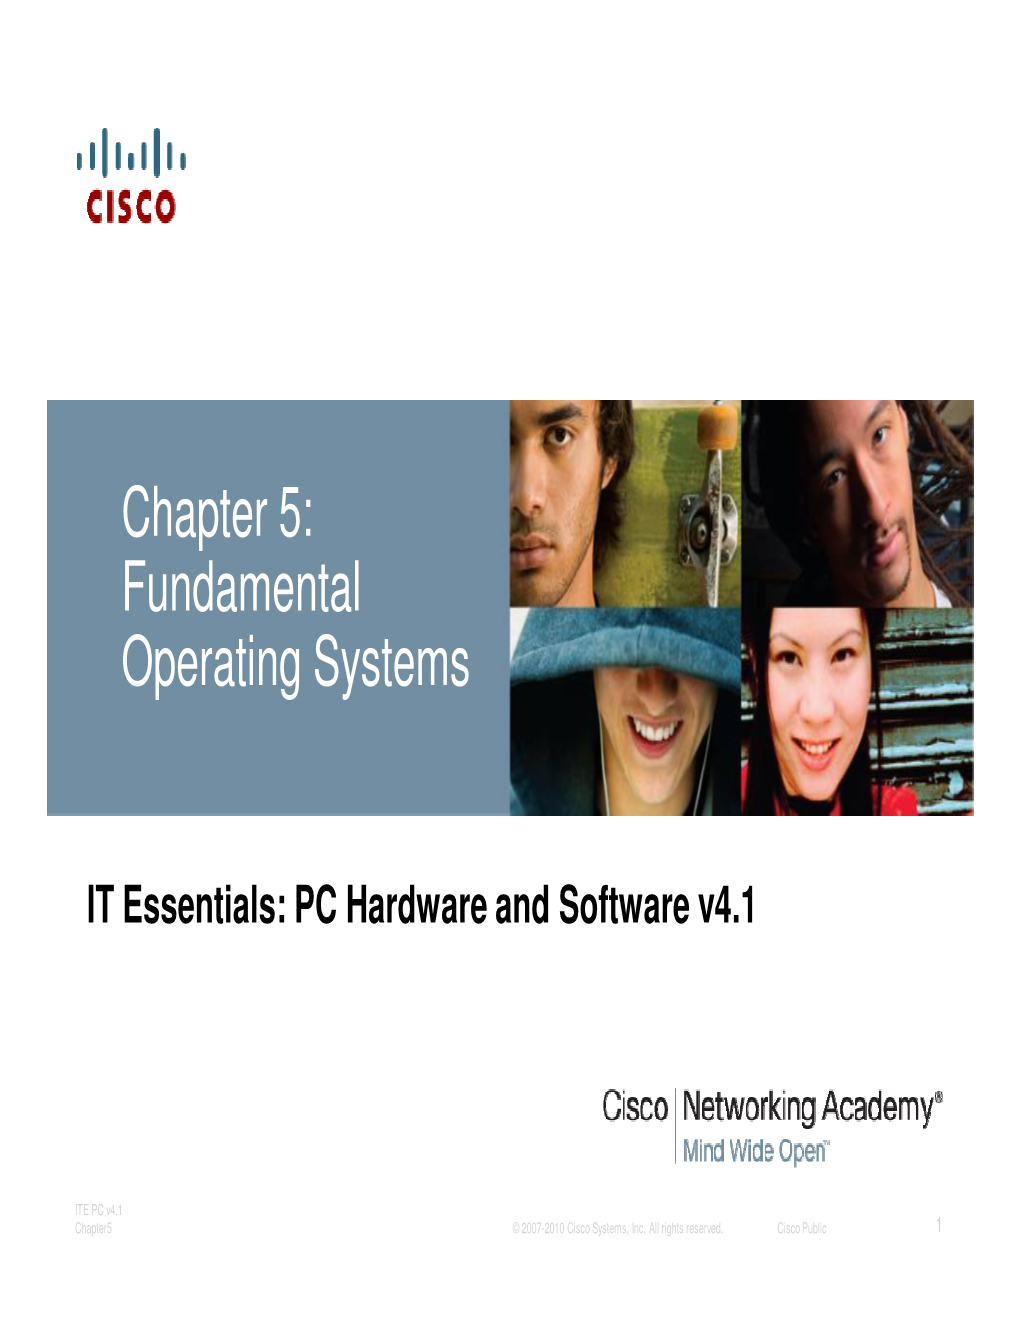 Chapter 5: Fundamental Operating Systems